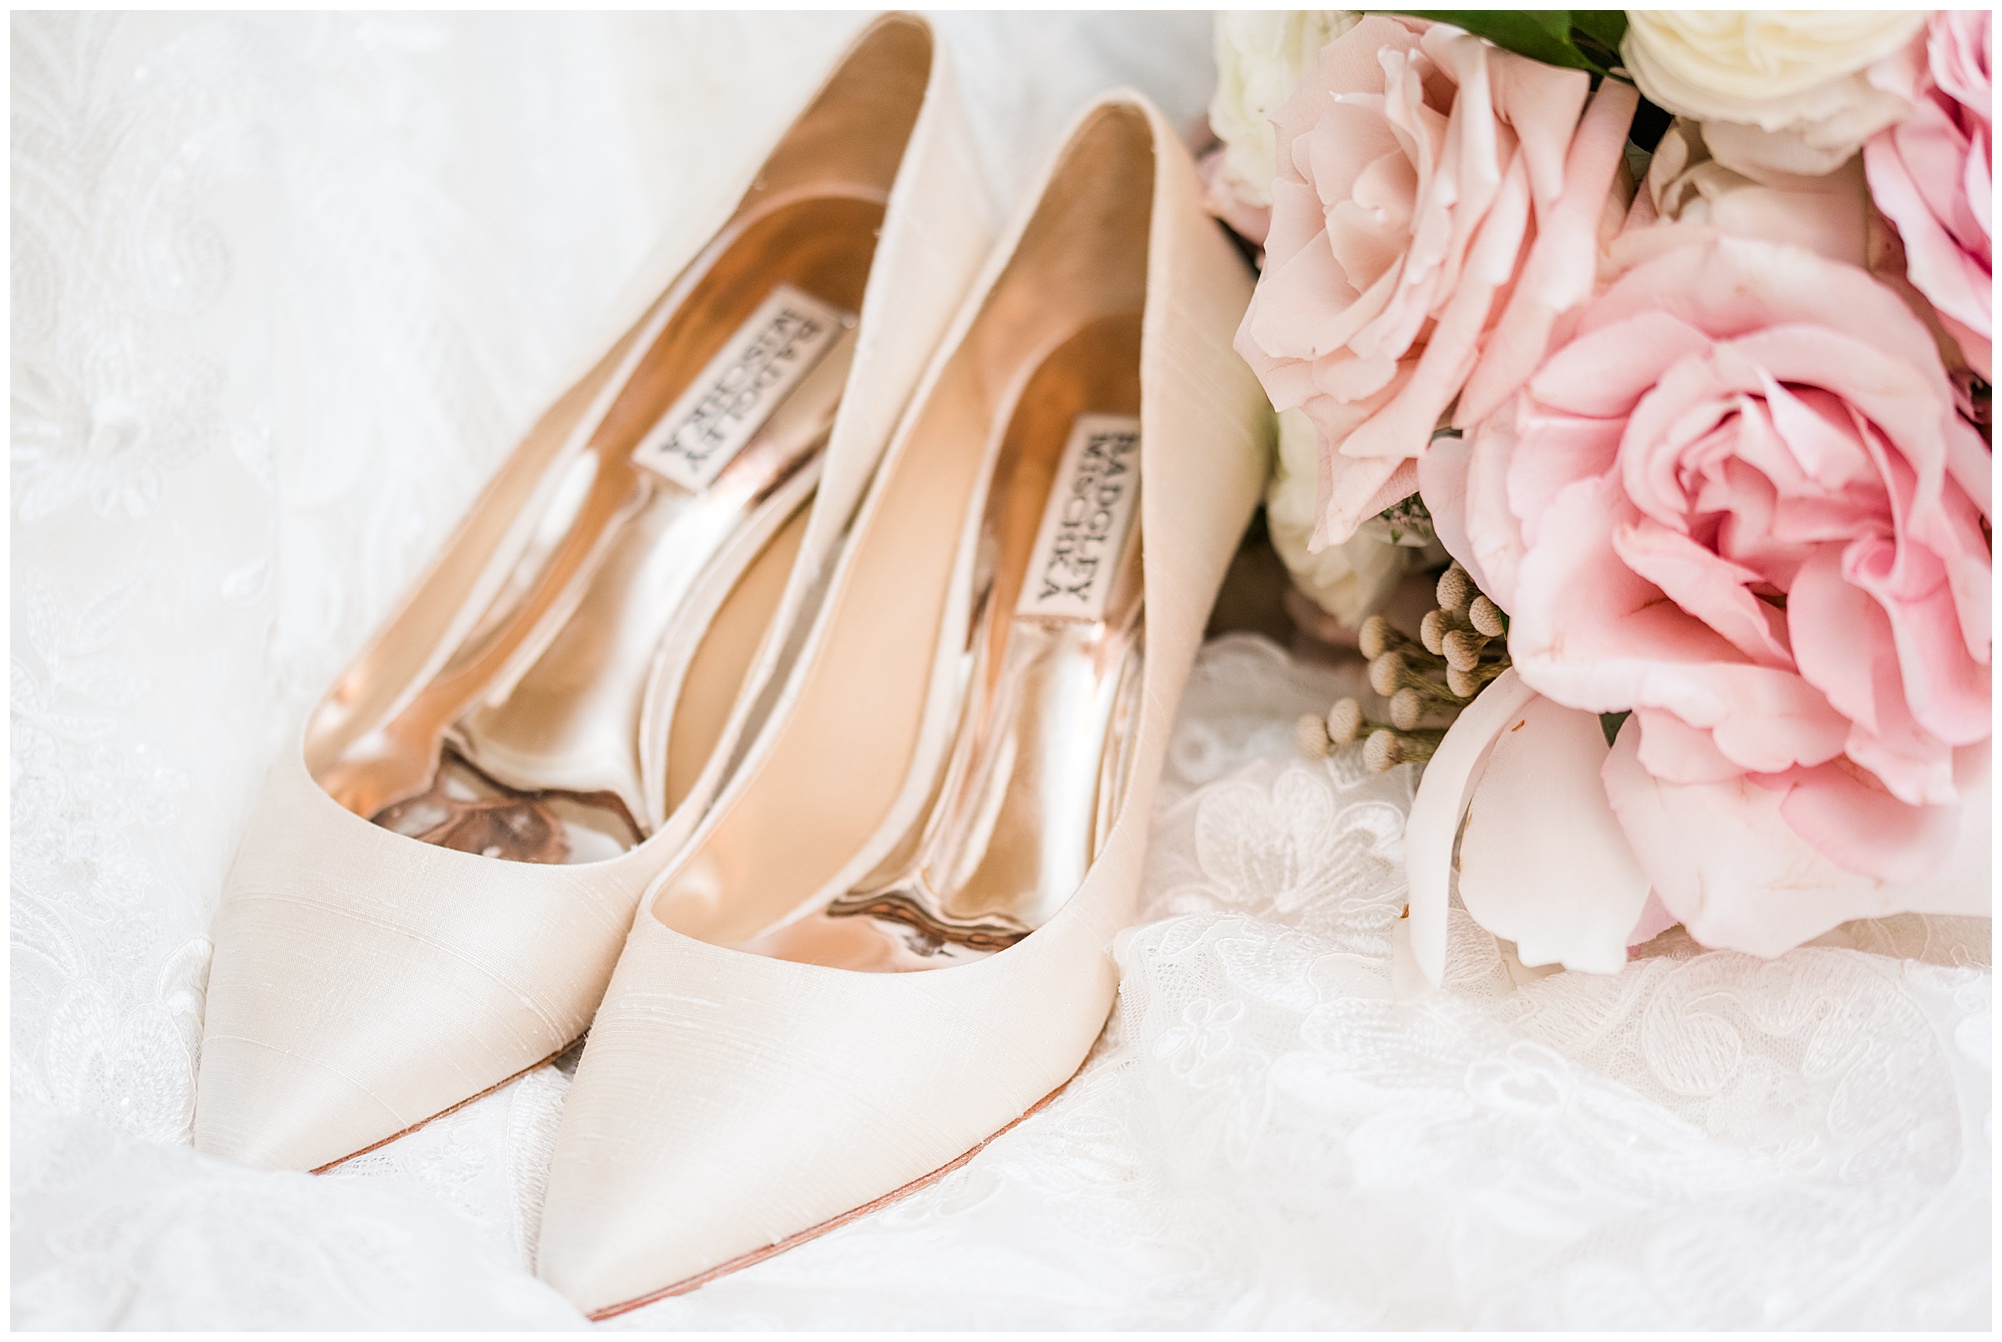 badgley mischka wedding heels in white. closed toe. with pink roses and rose petals. prewedding day detail photo. by richmond va wedding photographer, sarah & dave photography